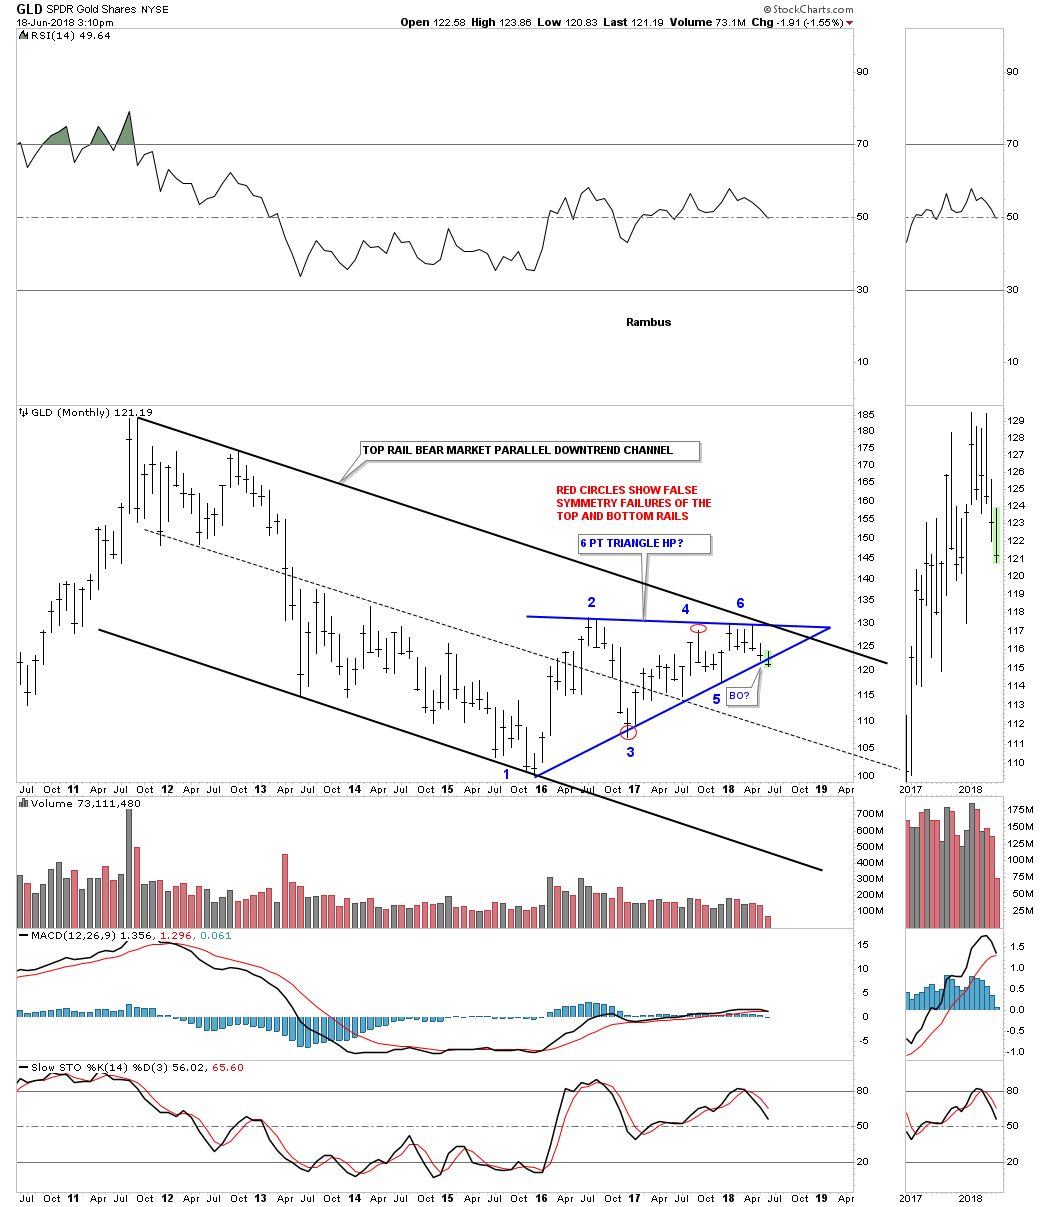 GLD Monthly 2010-2018